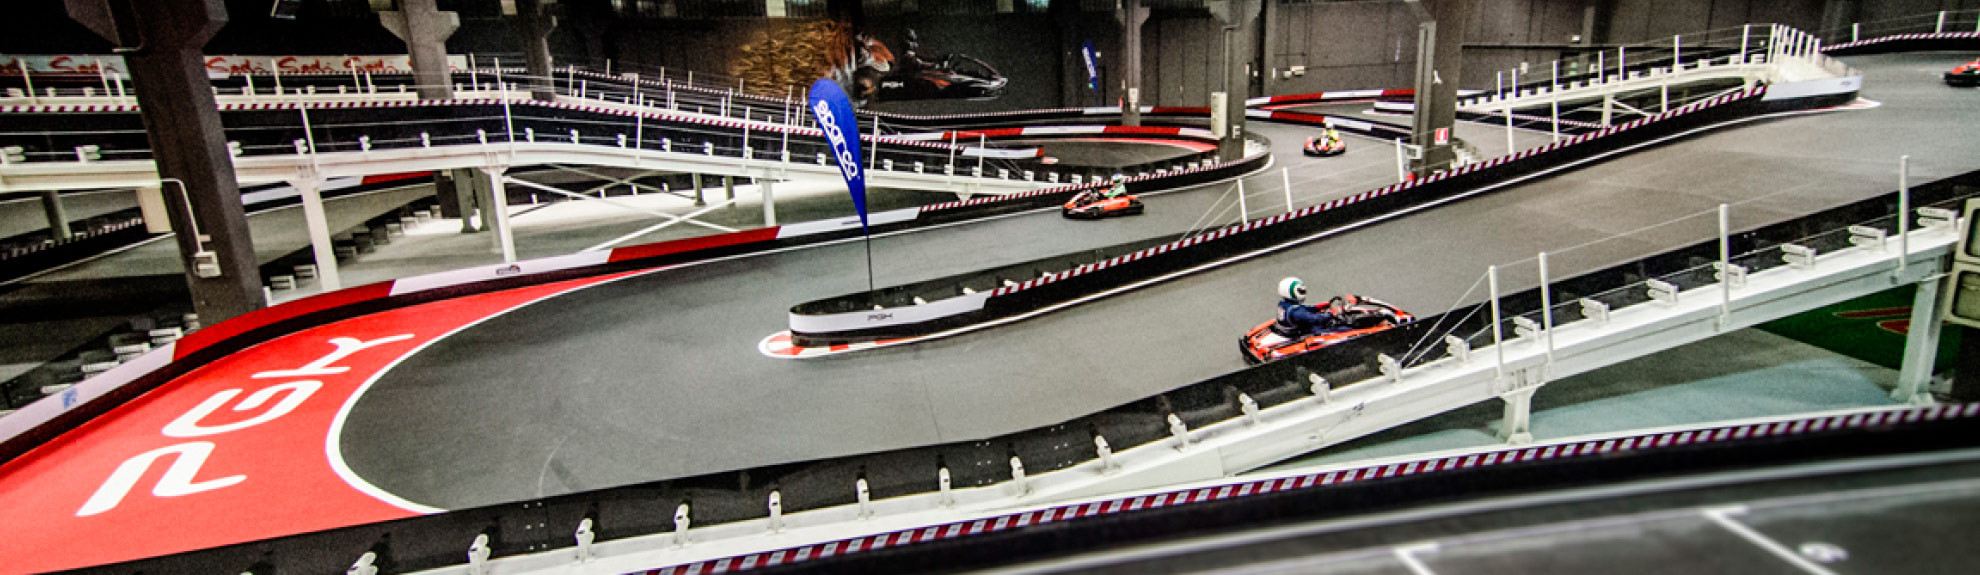 Kart track realized by a third party using Vesmaco's materials - France (2013)